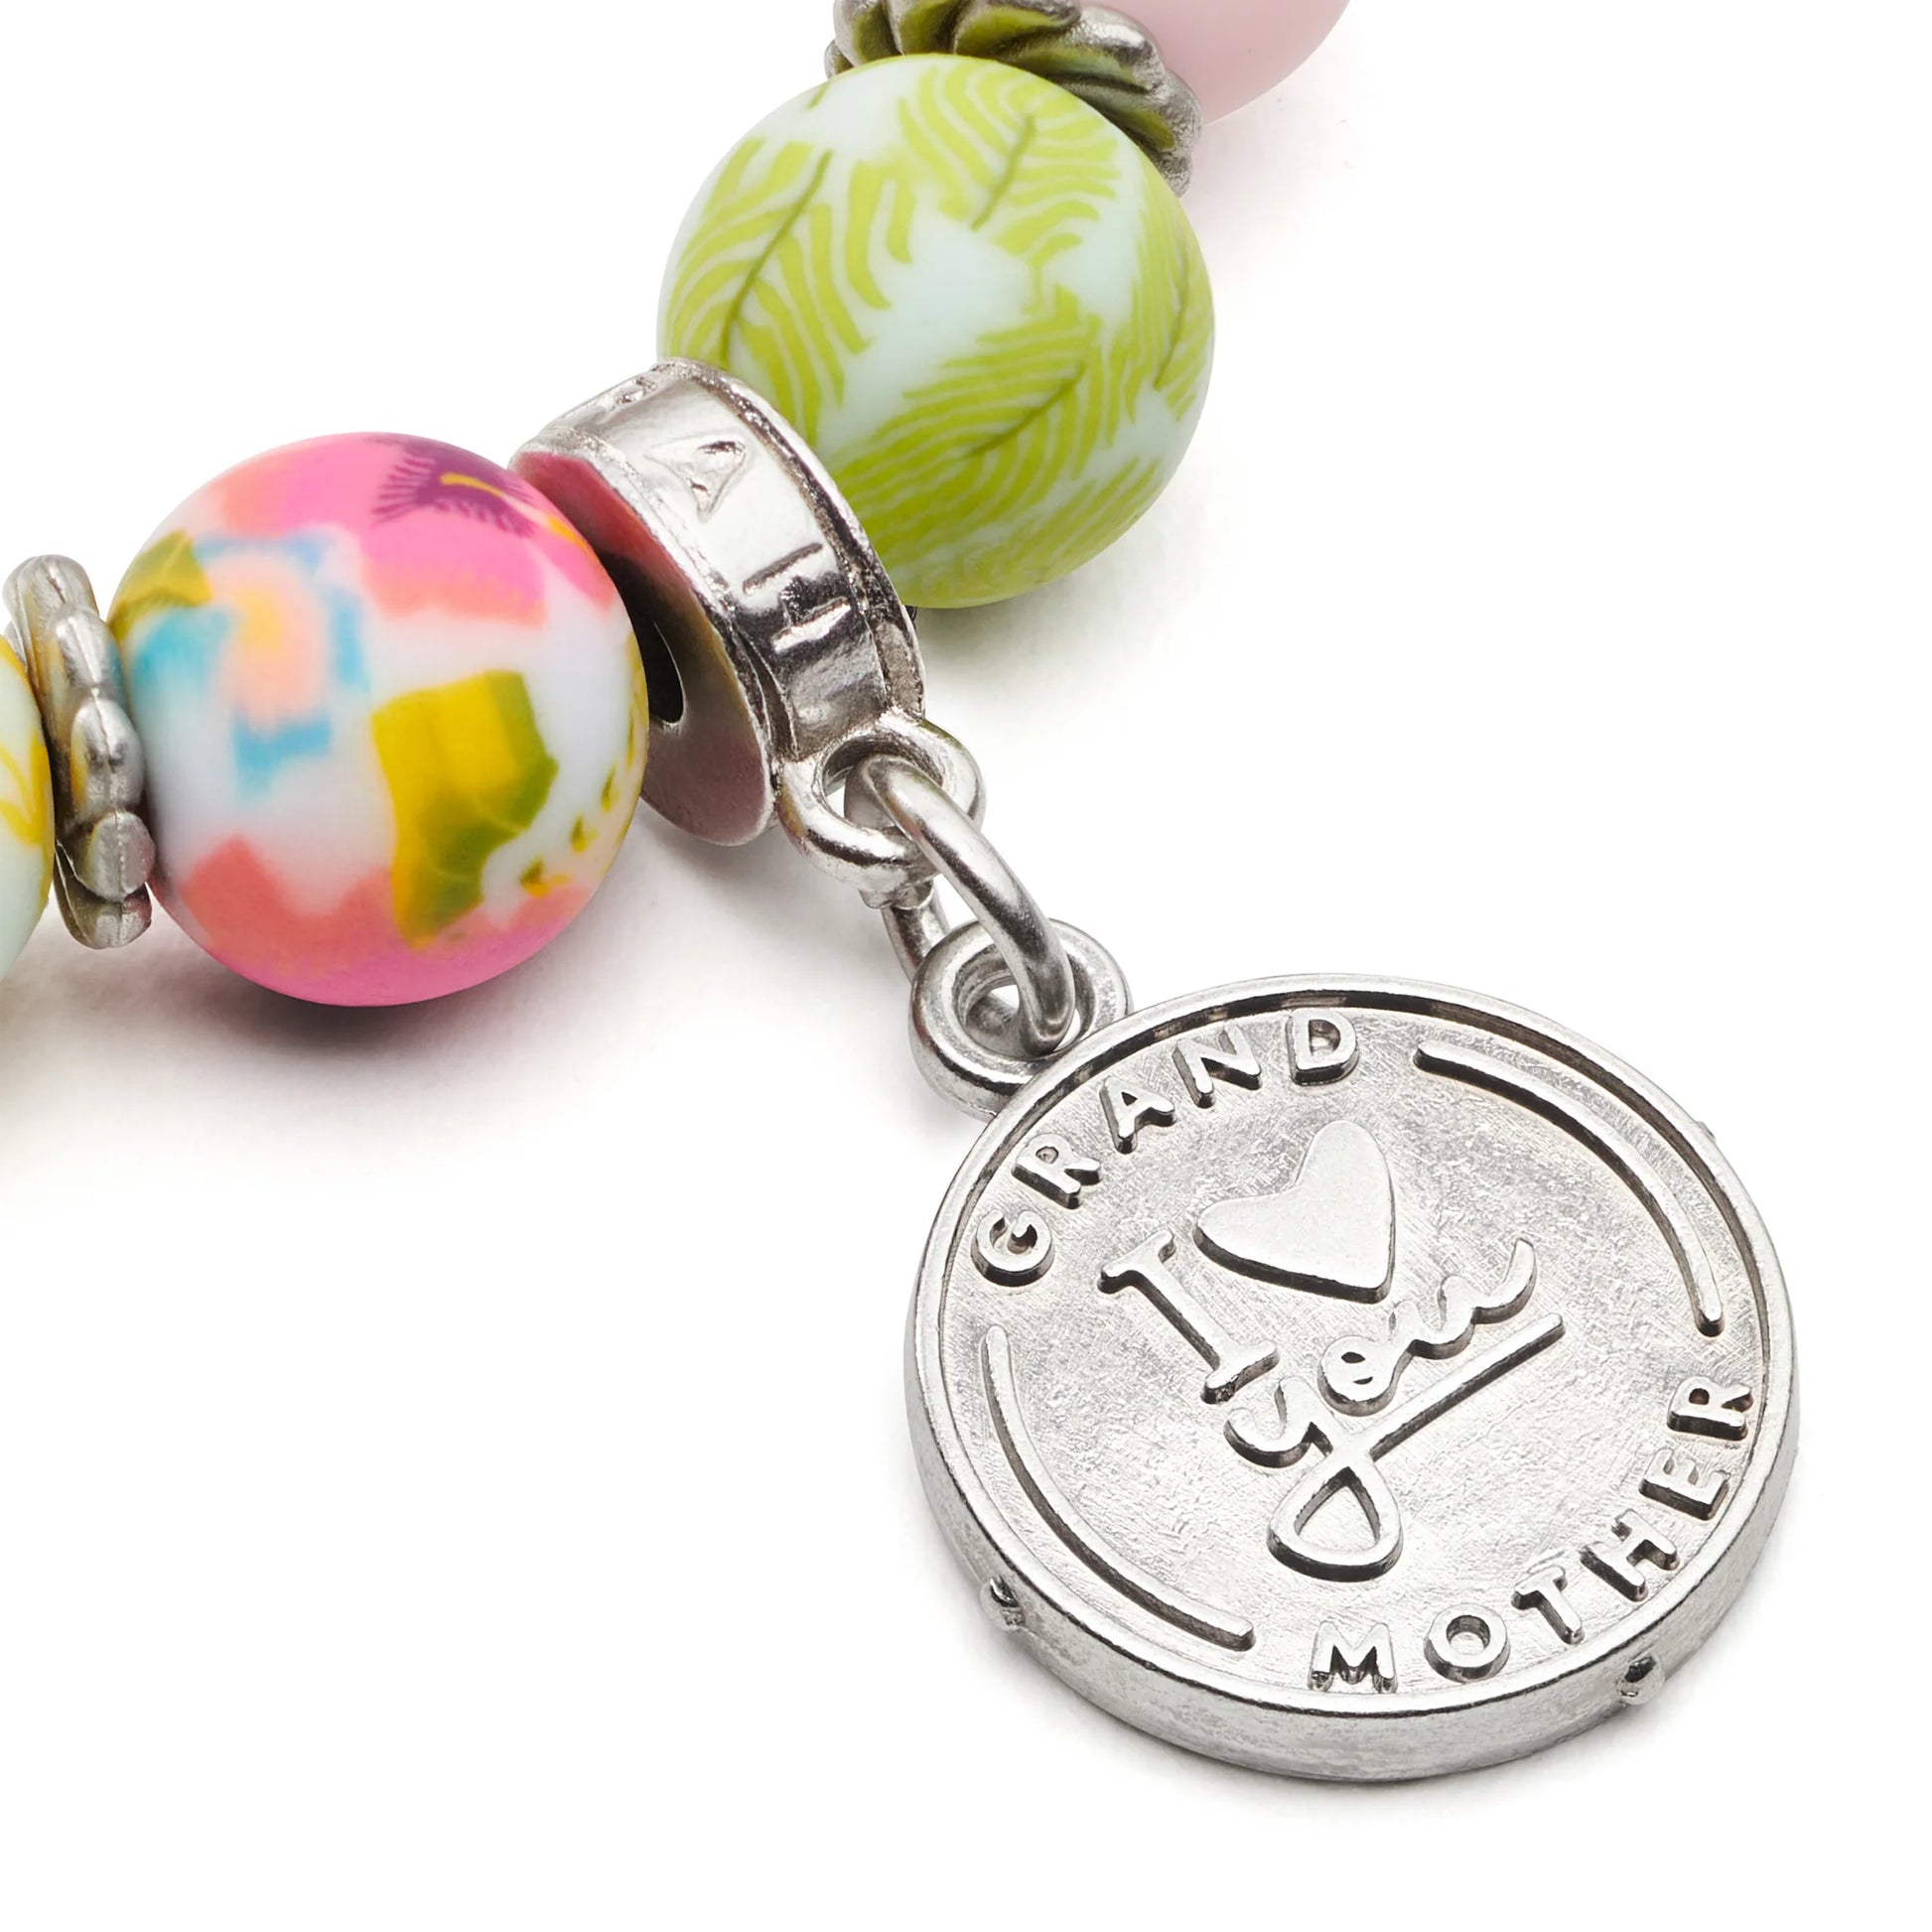 close-up of charm stamped with "grandmother i love you".